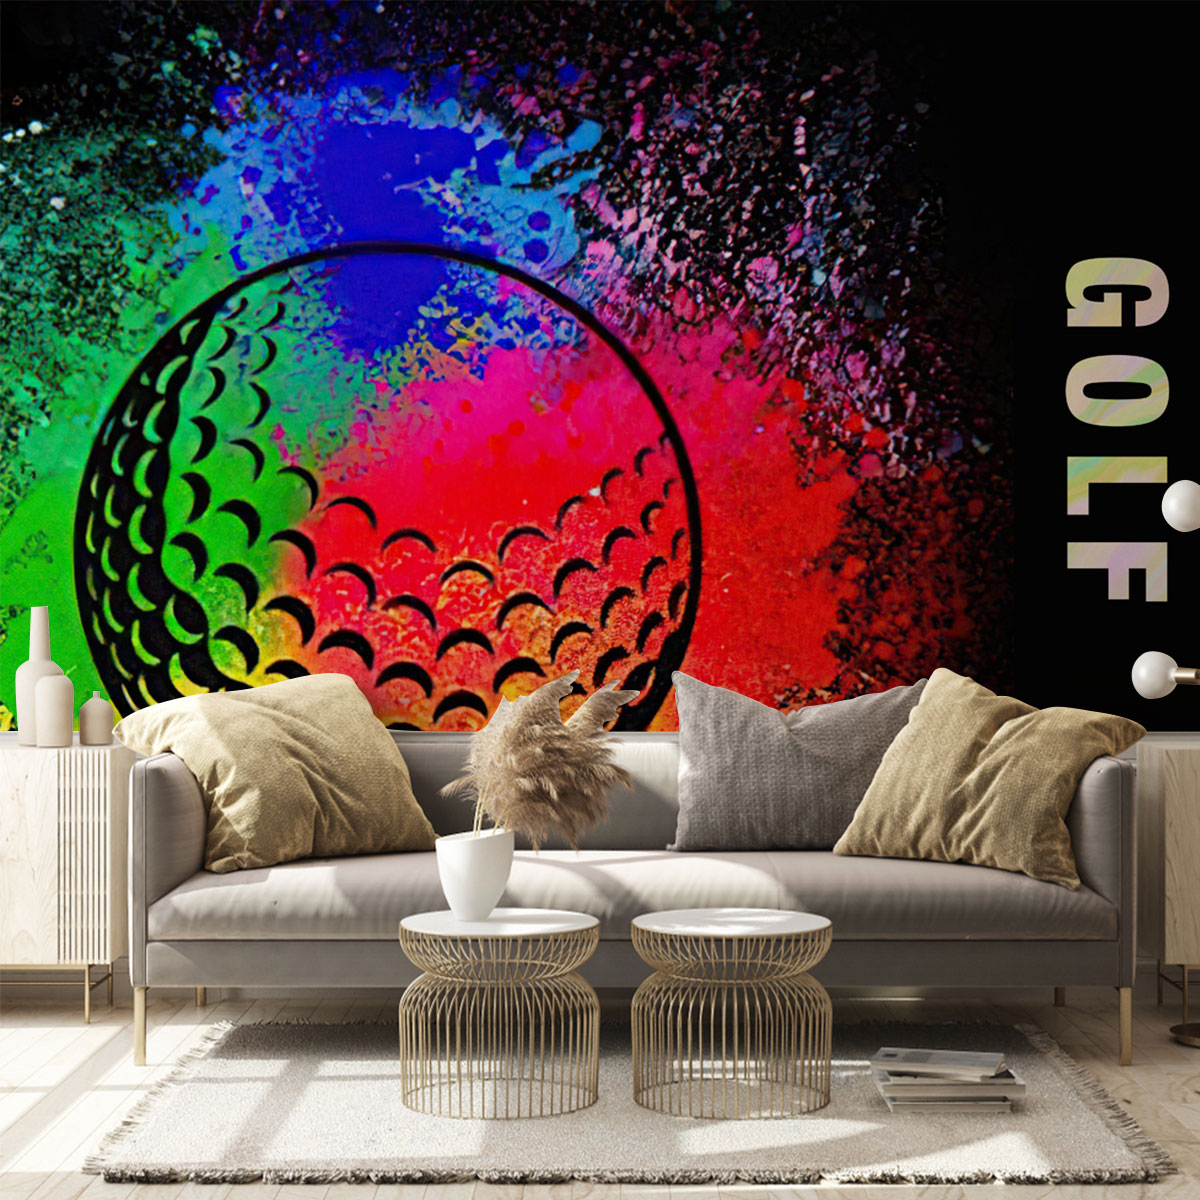 Colorful Golf Wall Mural